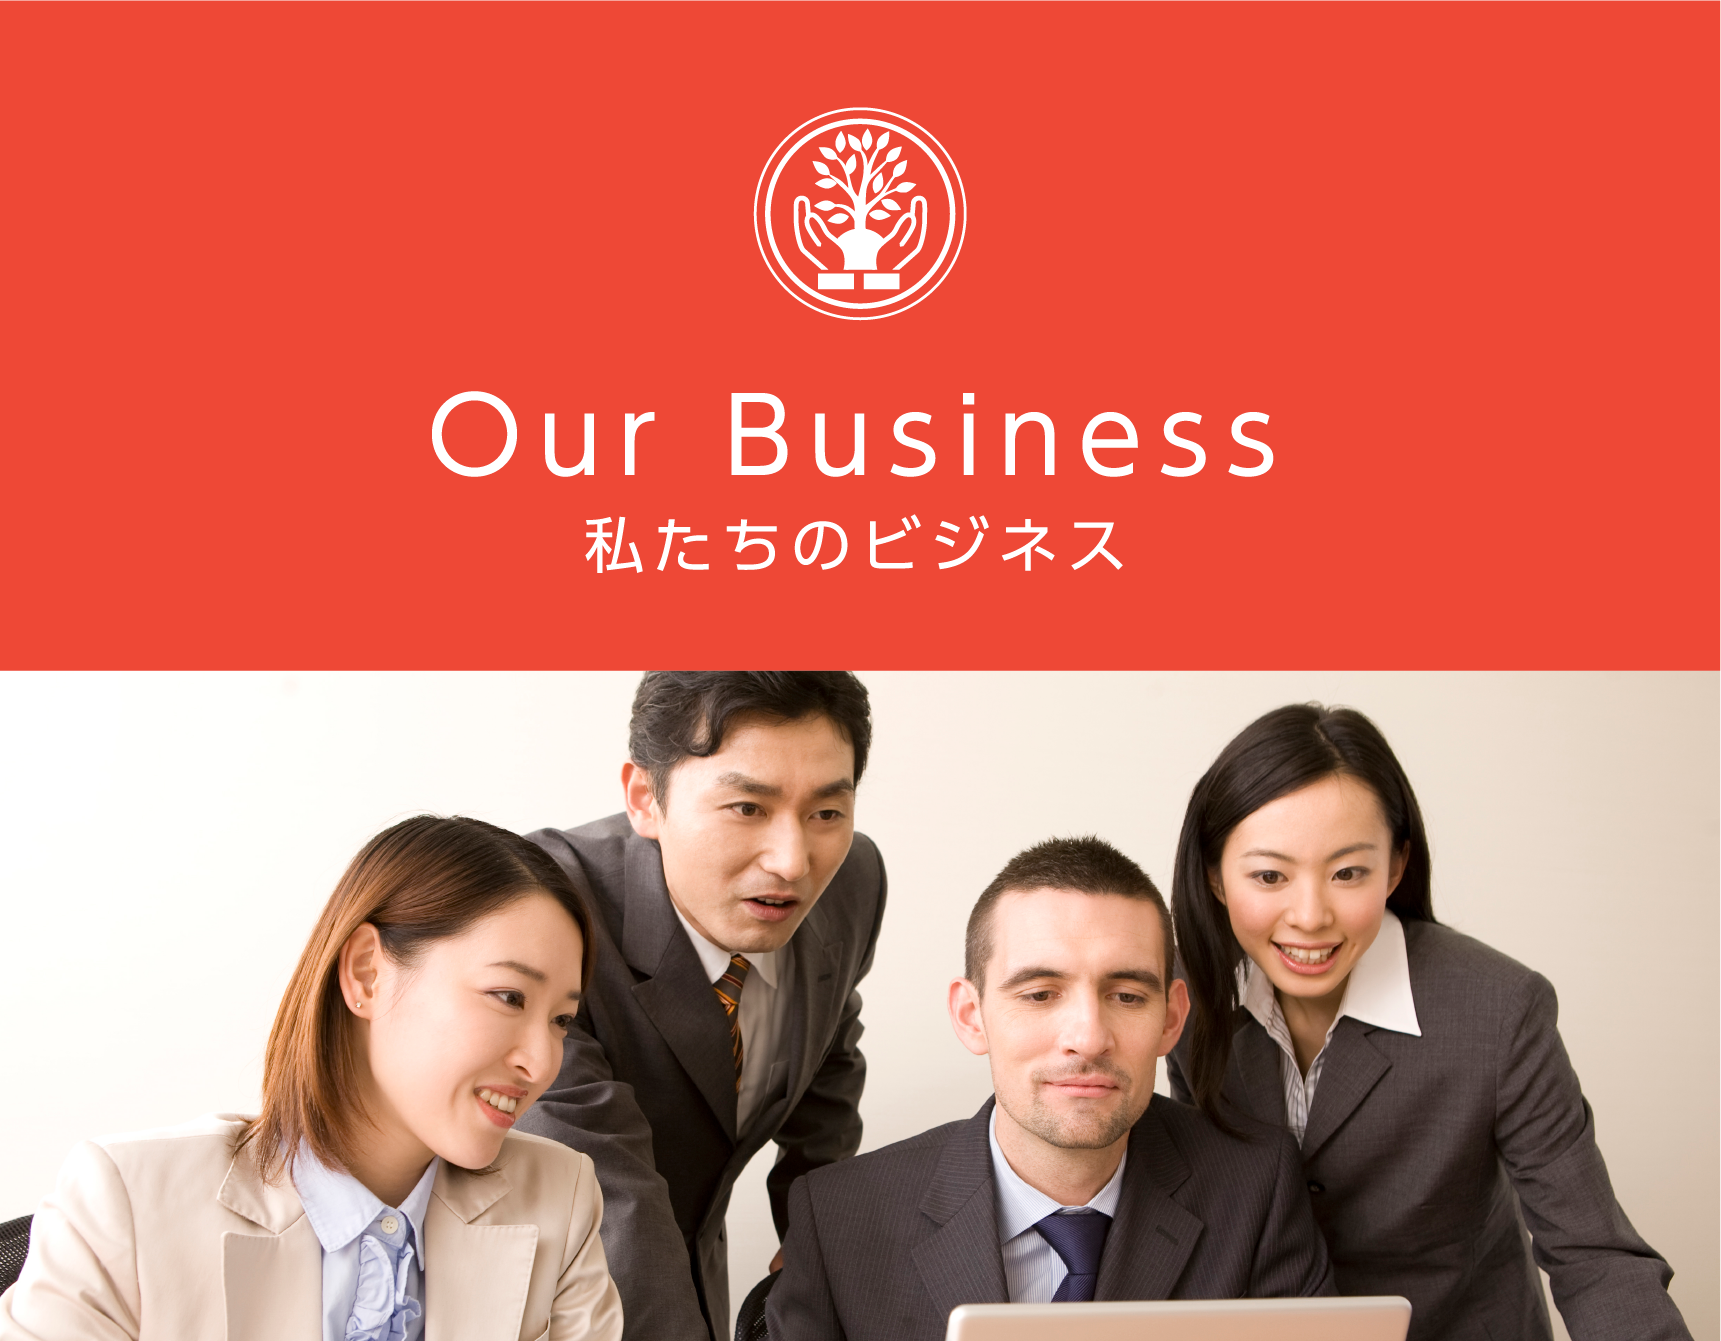 Our Business 私たちのビジネス